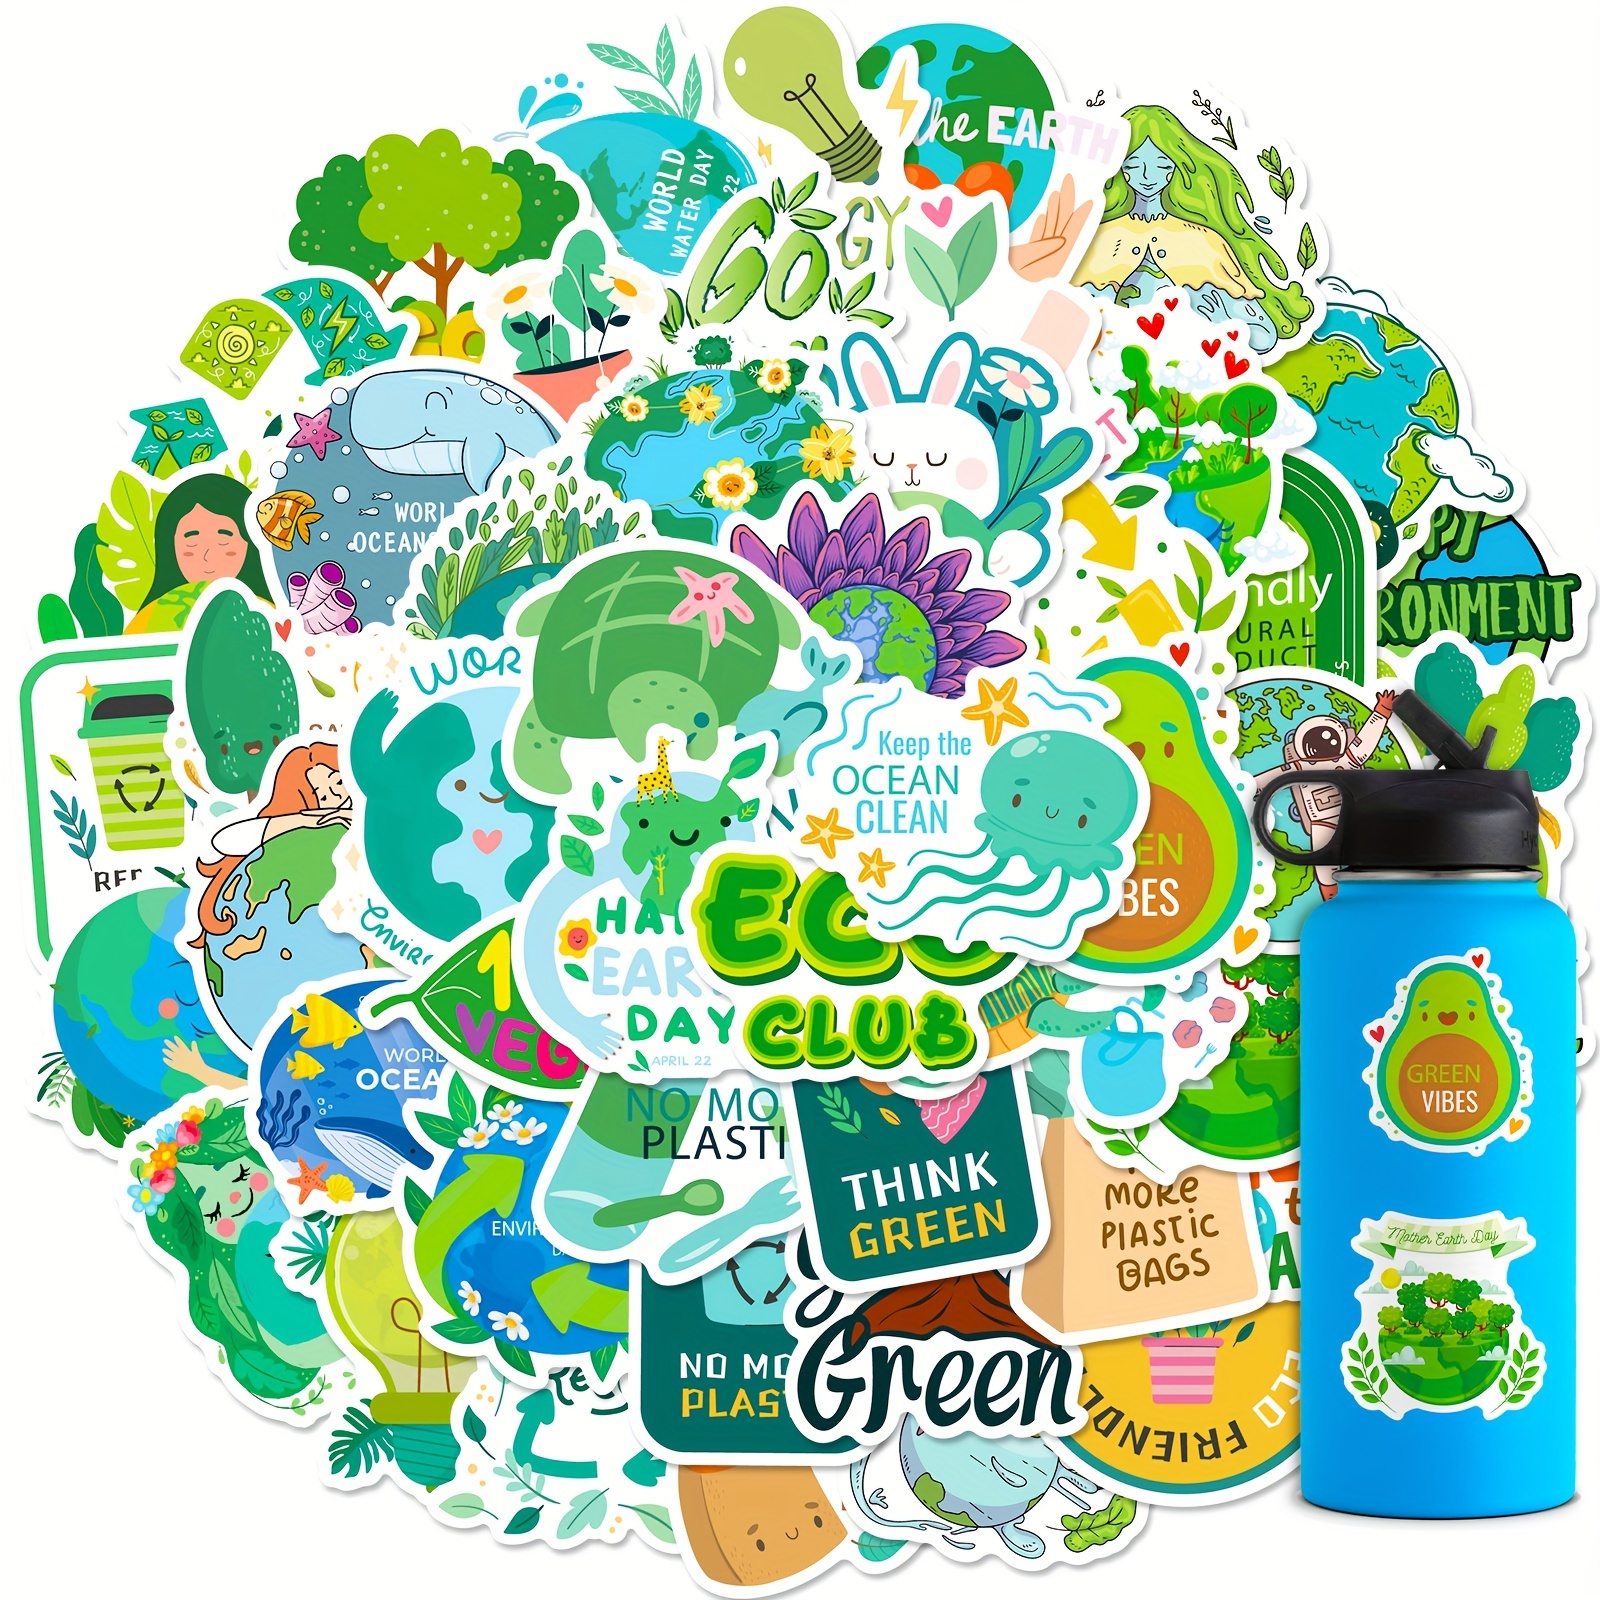 50pcs Forest Stickers for Scrapbooking, Green Tree Animals Stickers, Outdoor Nature Vinyl Decals for Water Bottles Journal Bike Laptop Phone Luggage